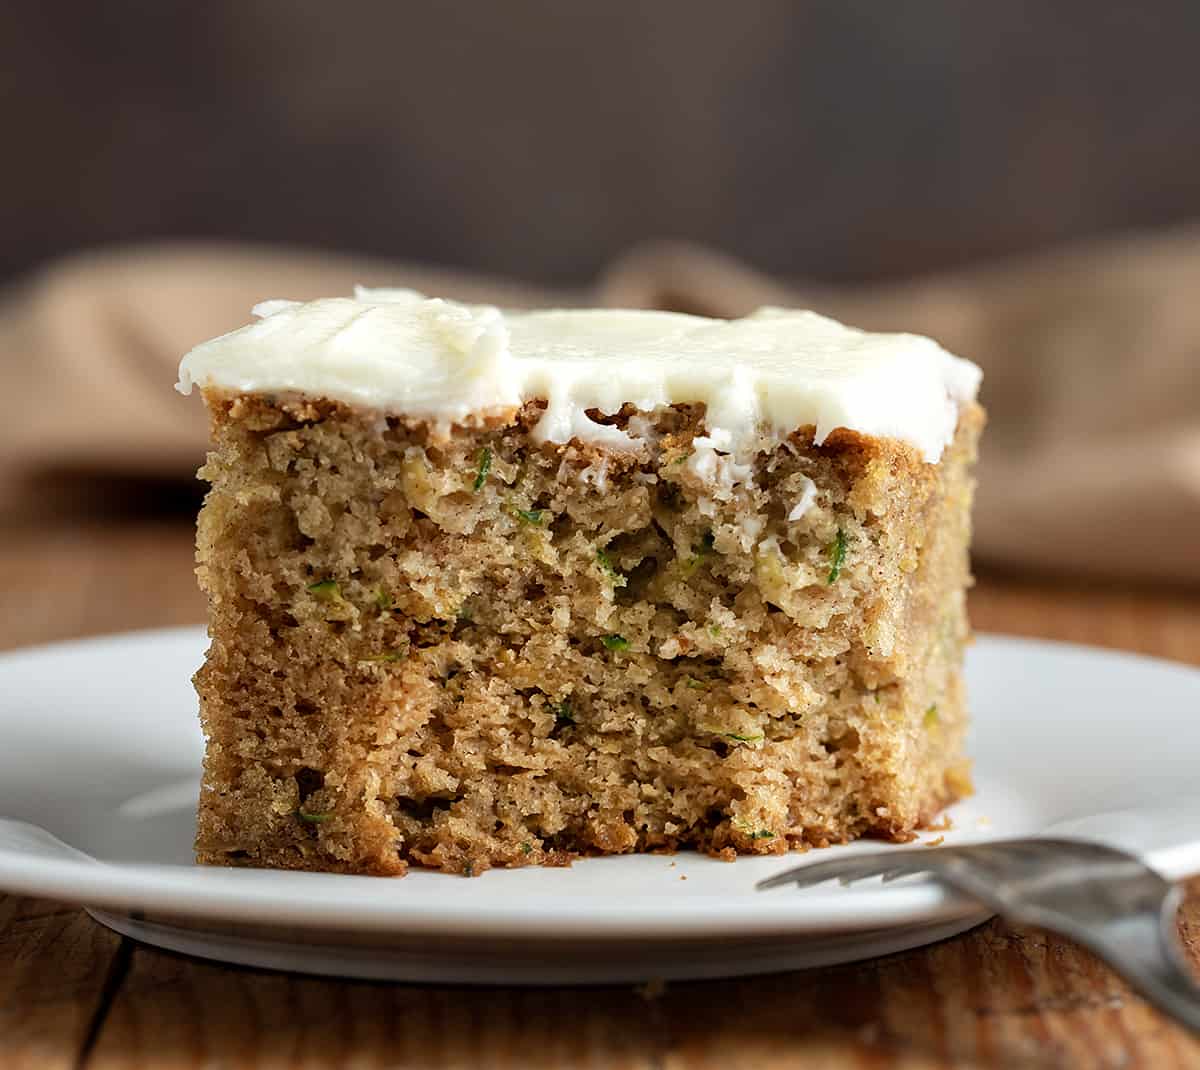 Piece of Zucchini Cake on a Plate with A bite Removed.